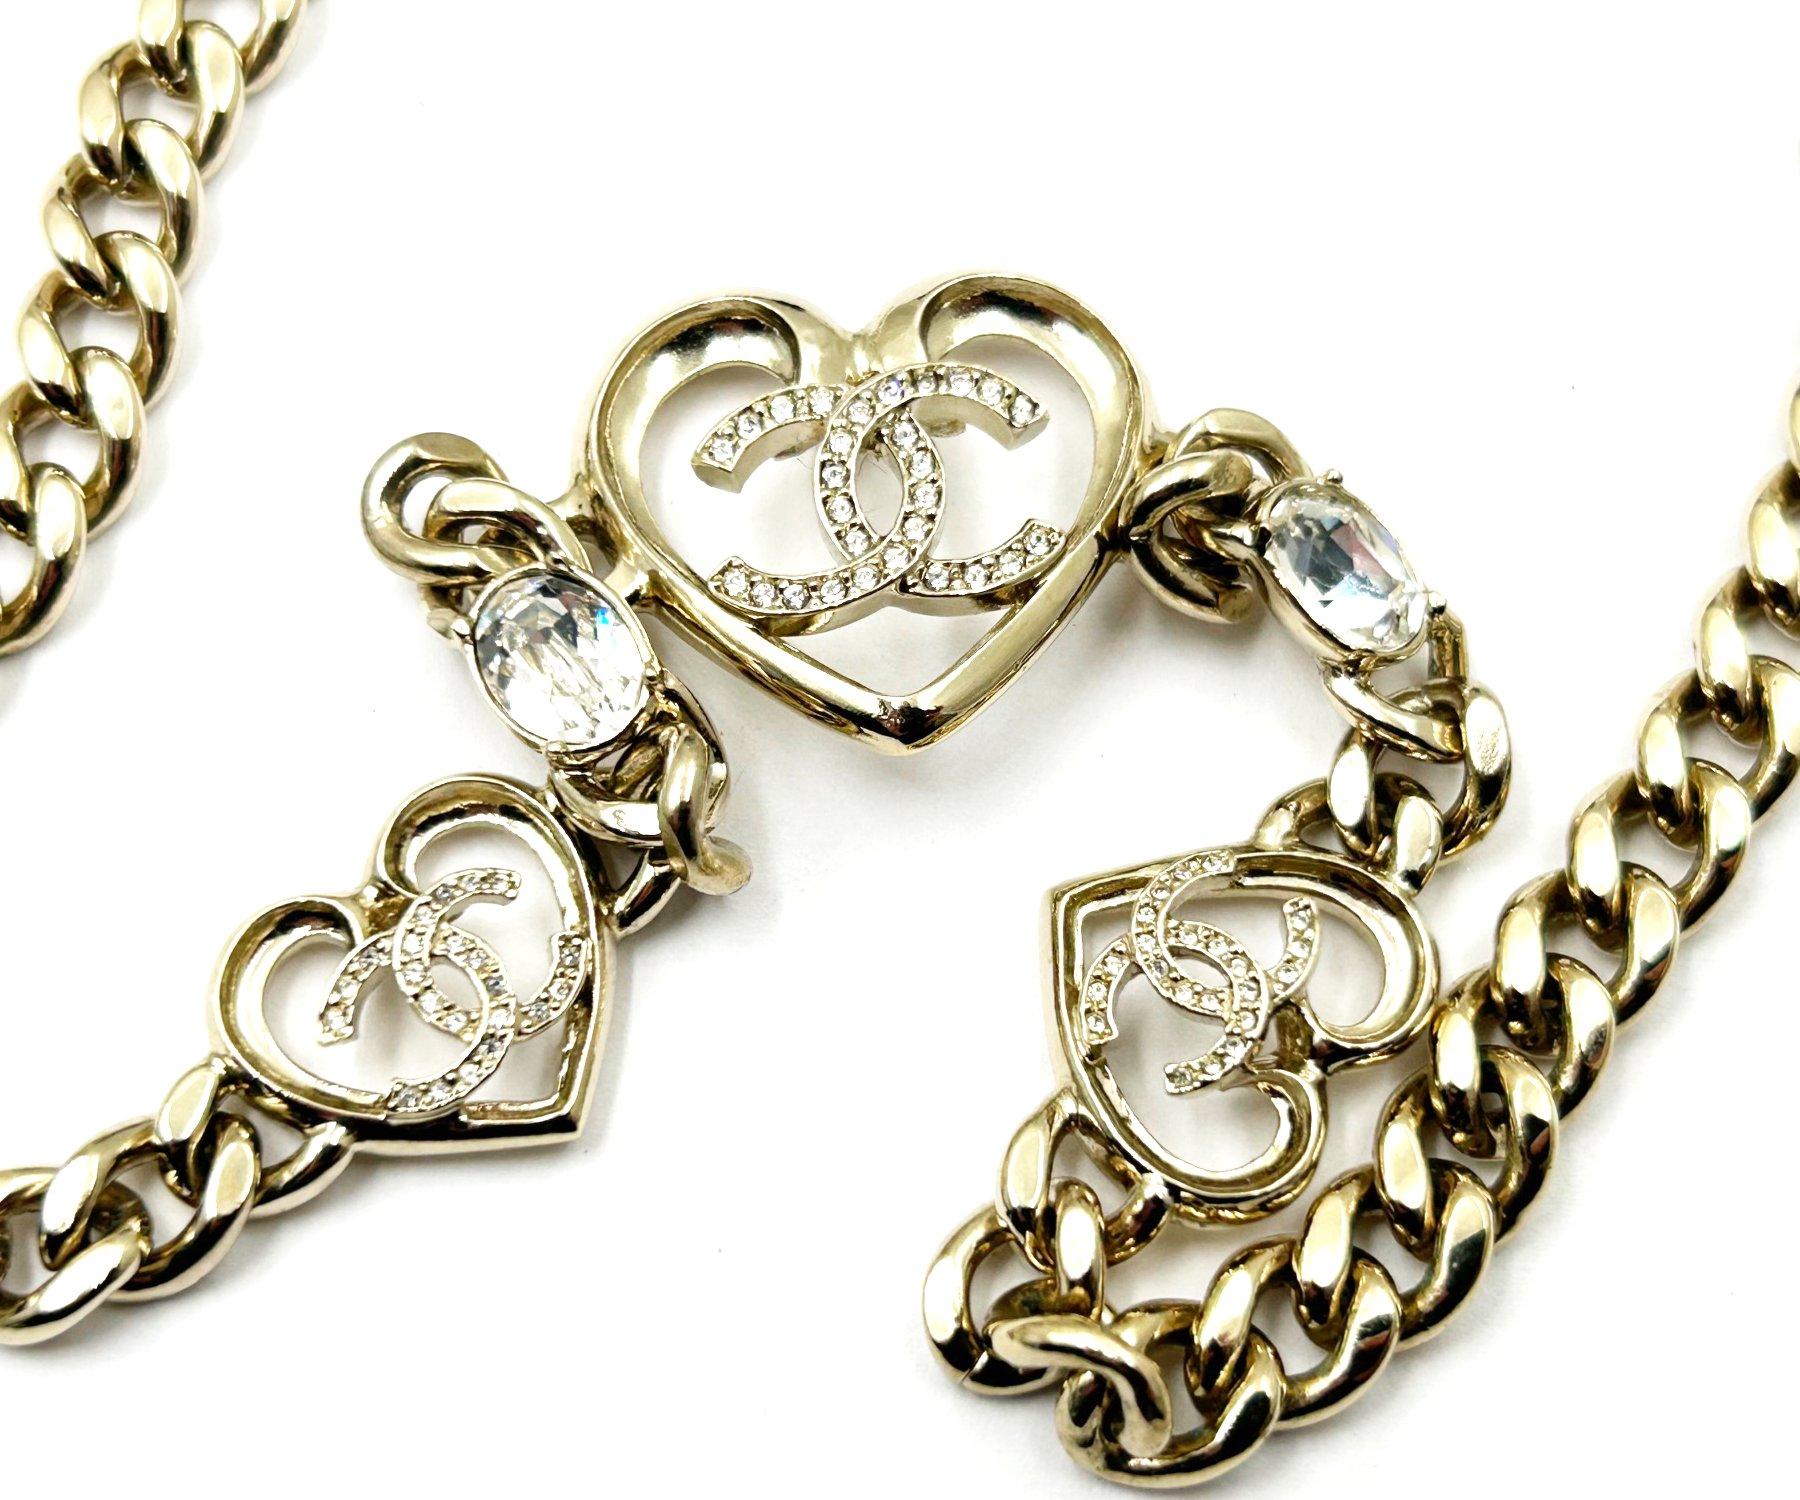 Chanel New Gold CC 3 Heart Crystal Chain Choker Necklace  In Excellent Condition For Sale In Pasadena, CA